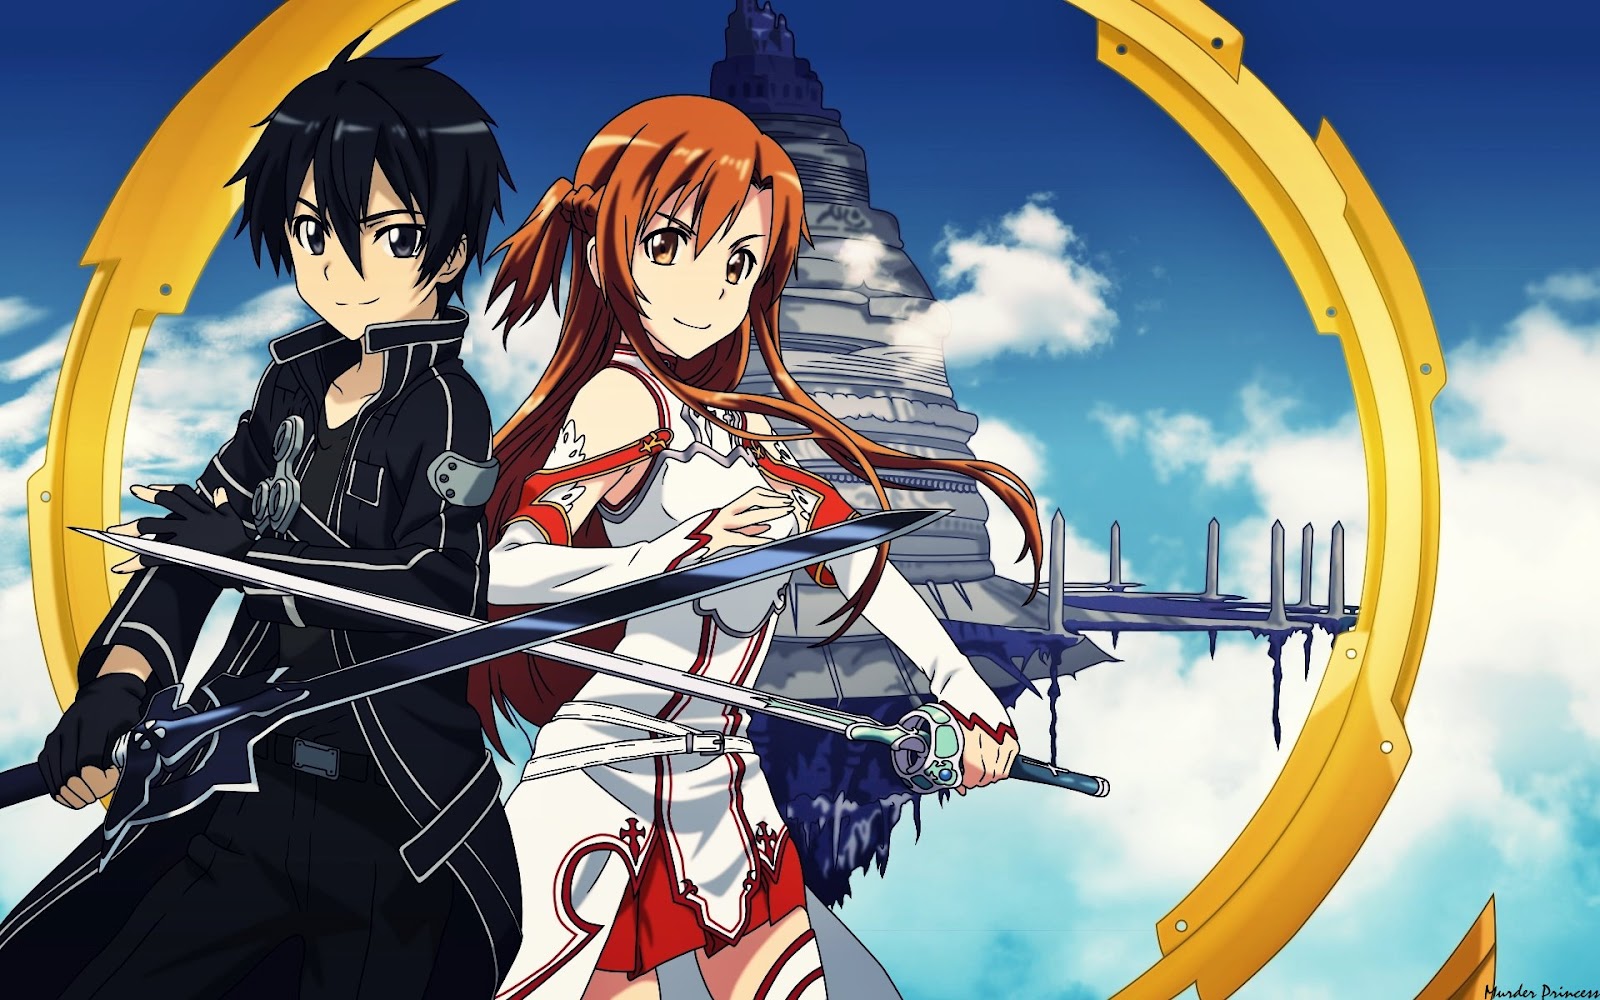 Oculus Showing Sword Art Online Demo for the Oculus Rift at Anime Expo